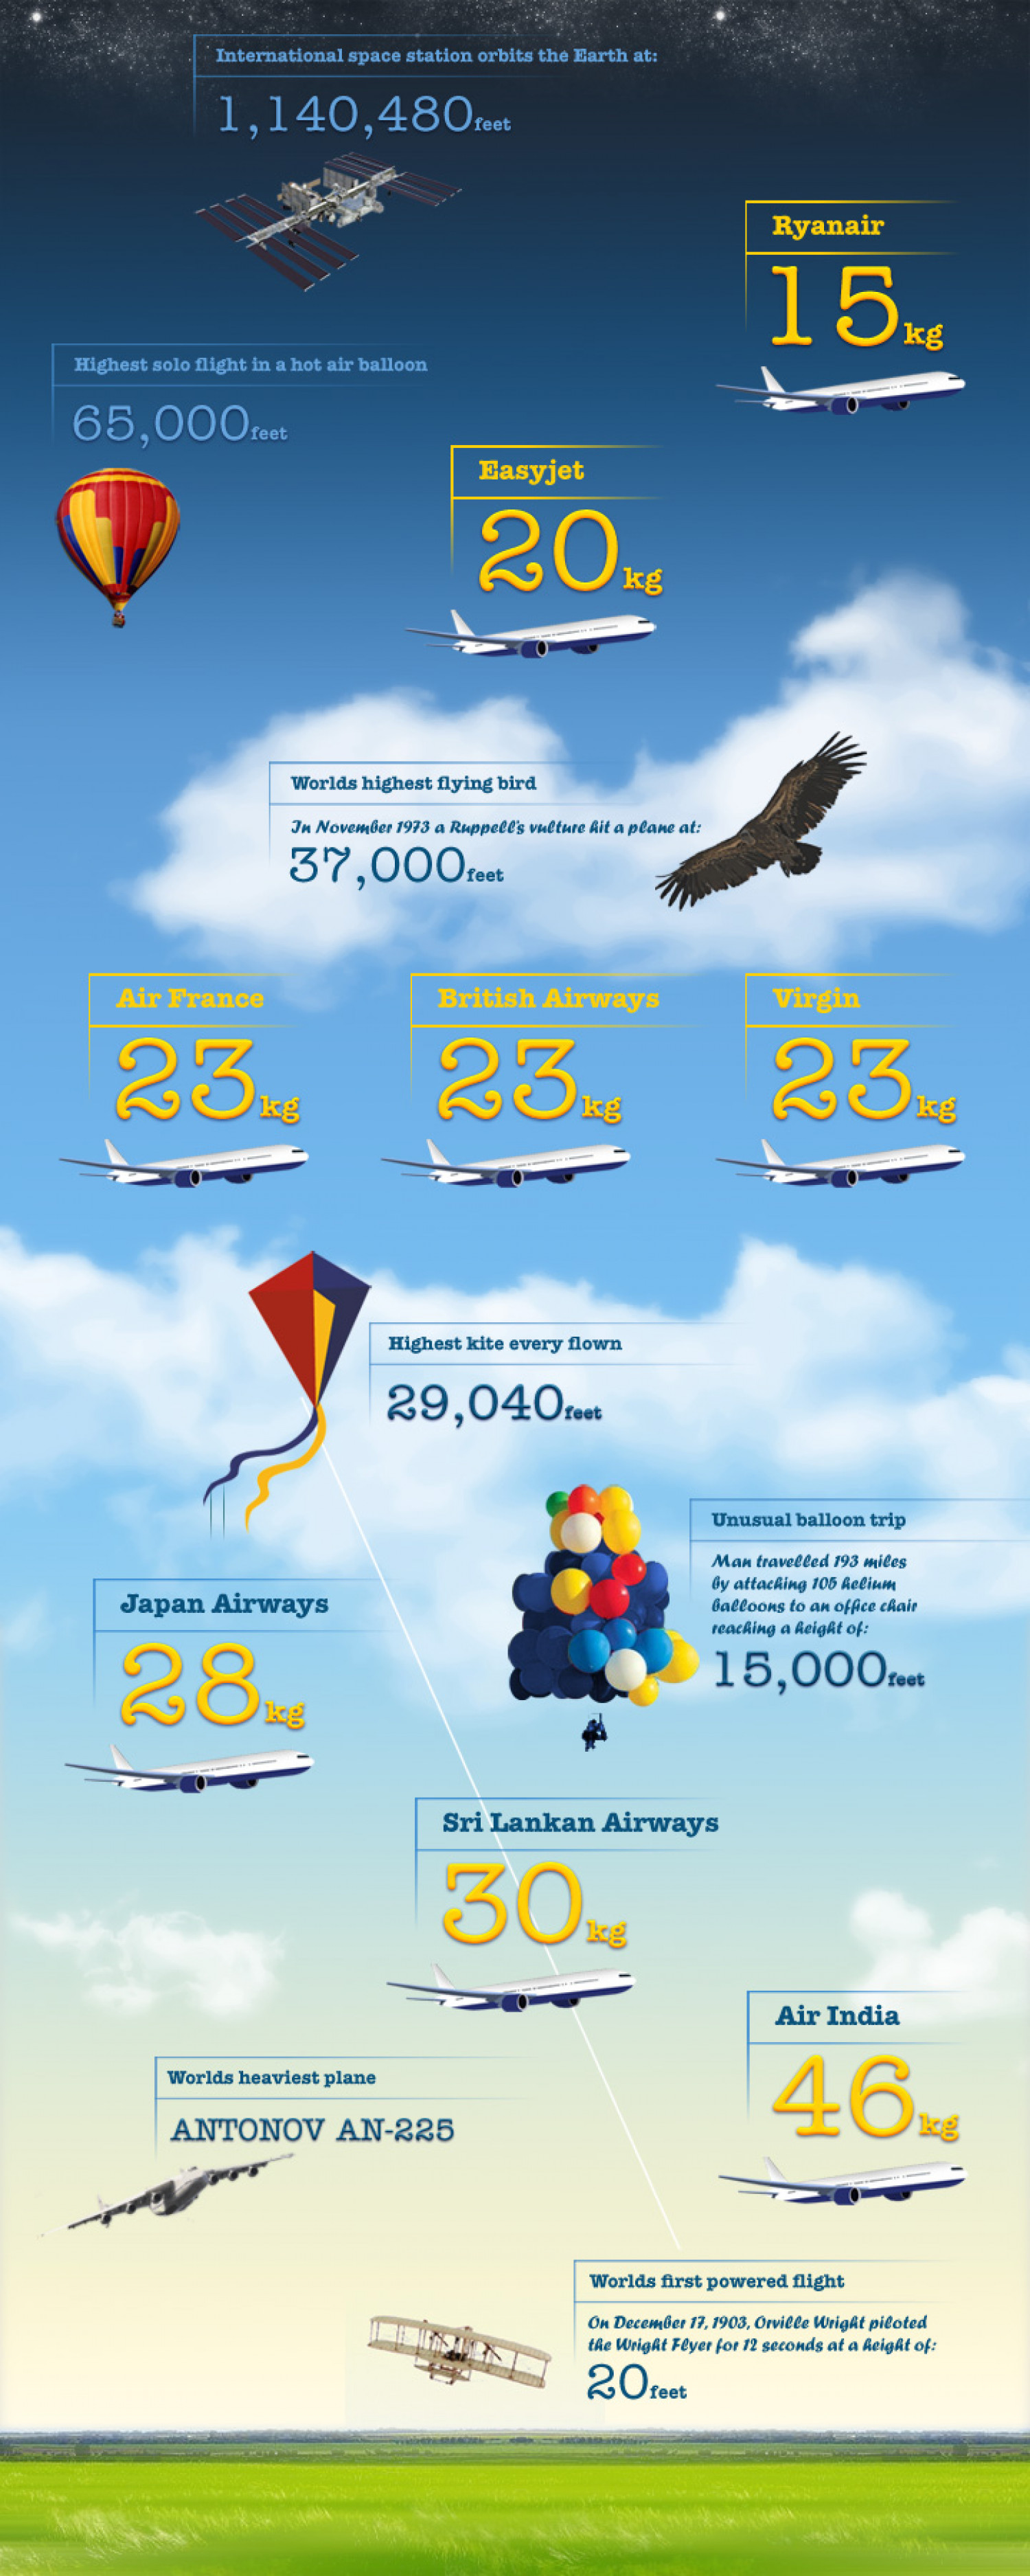 Baggage Allowances a World records | Visual.ly